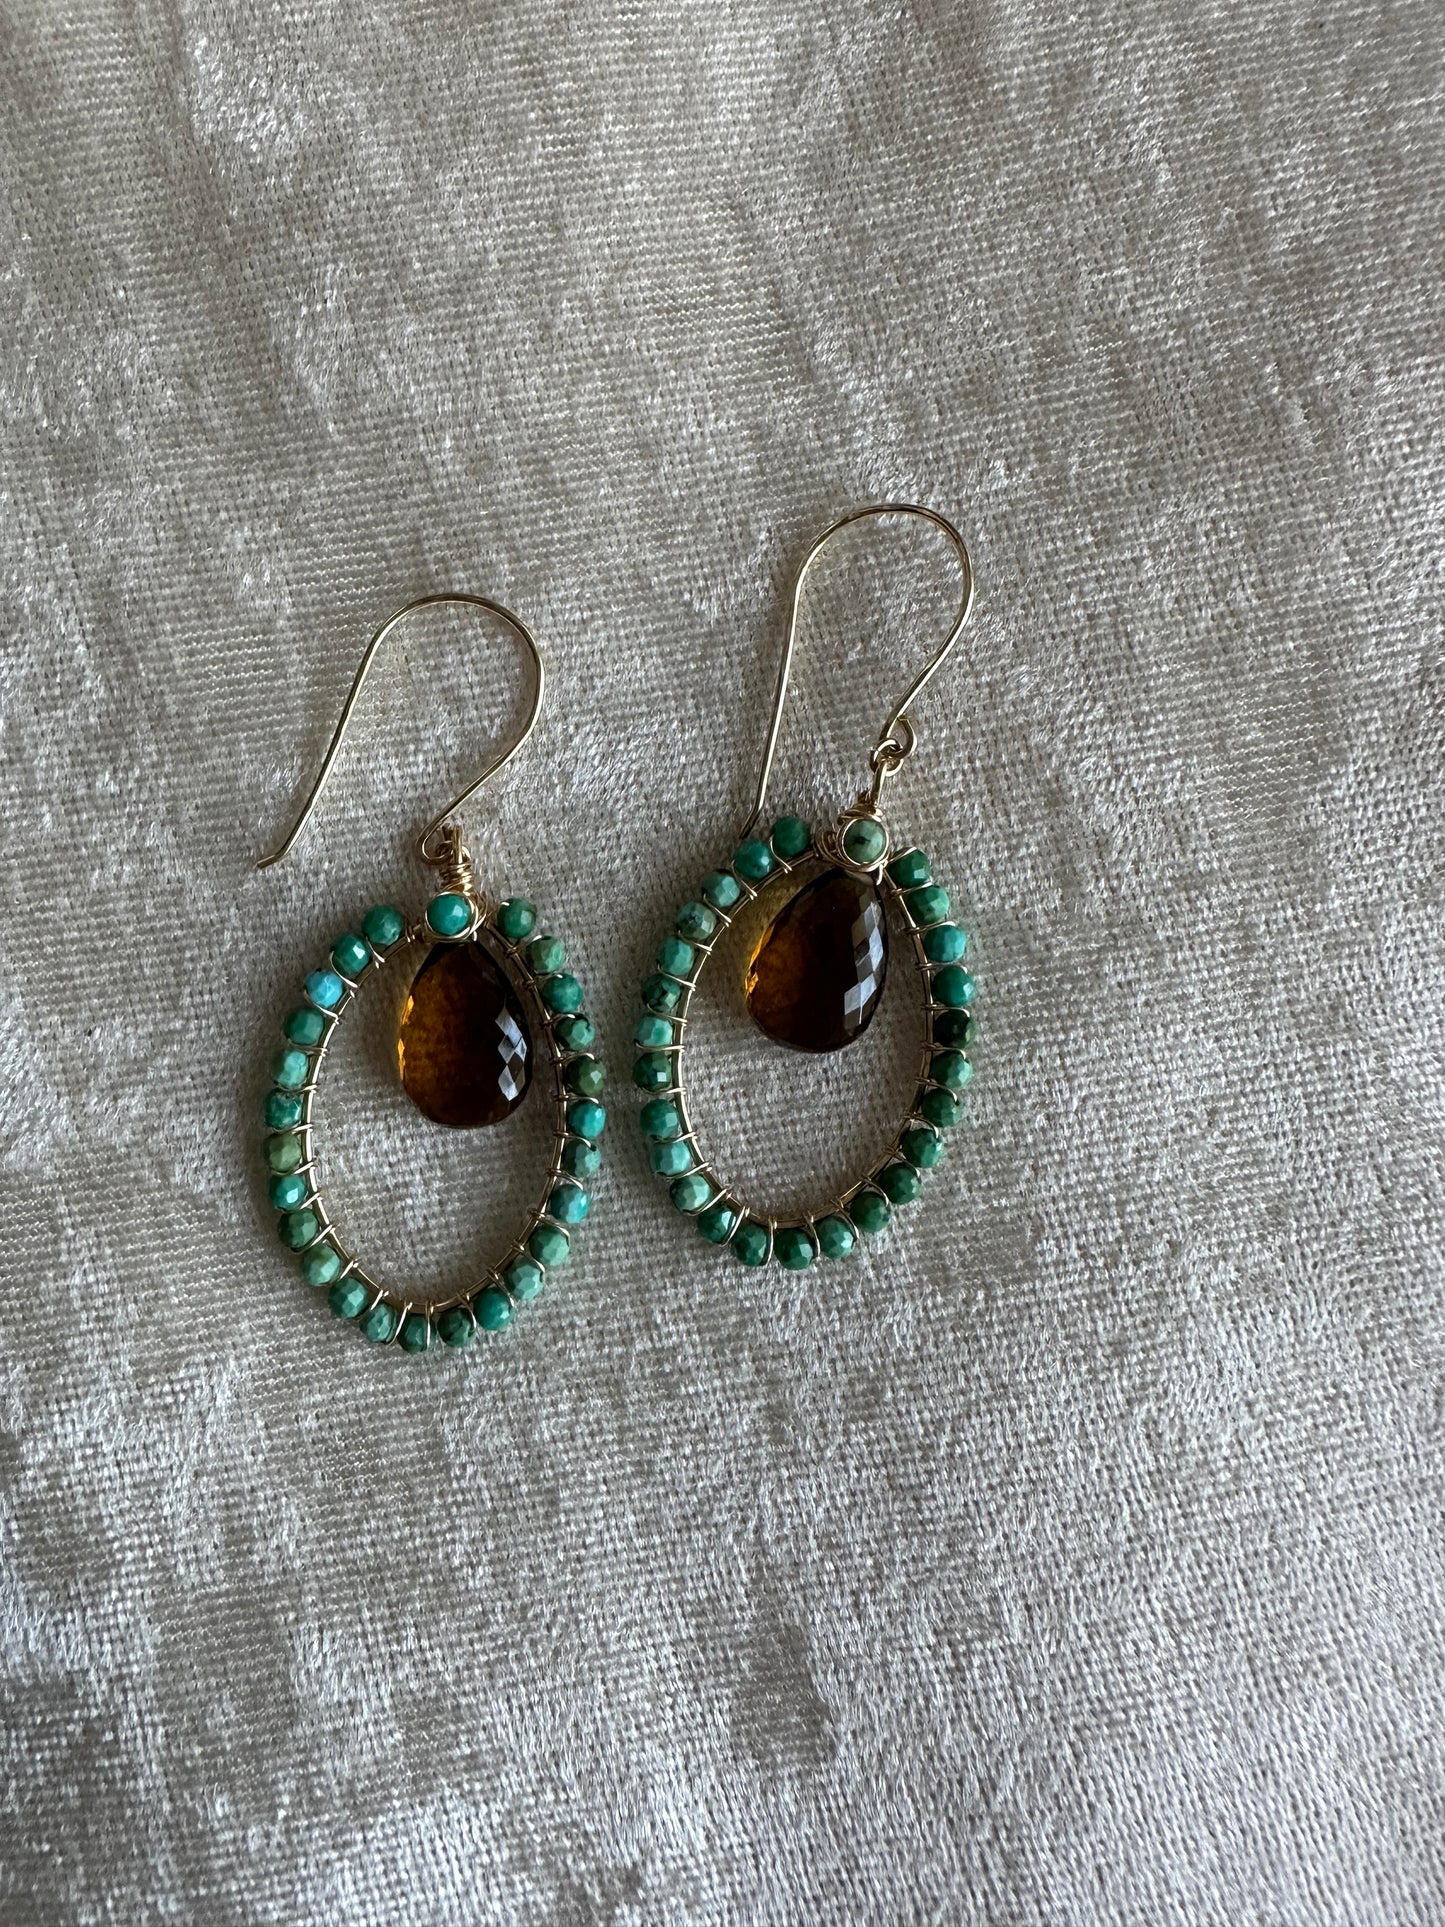 14kt Gold Filled Turquoise and Whiskey Quartz Earrings